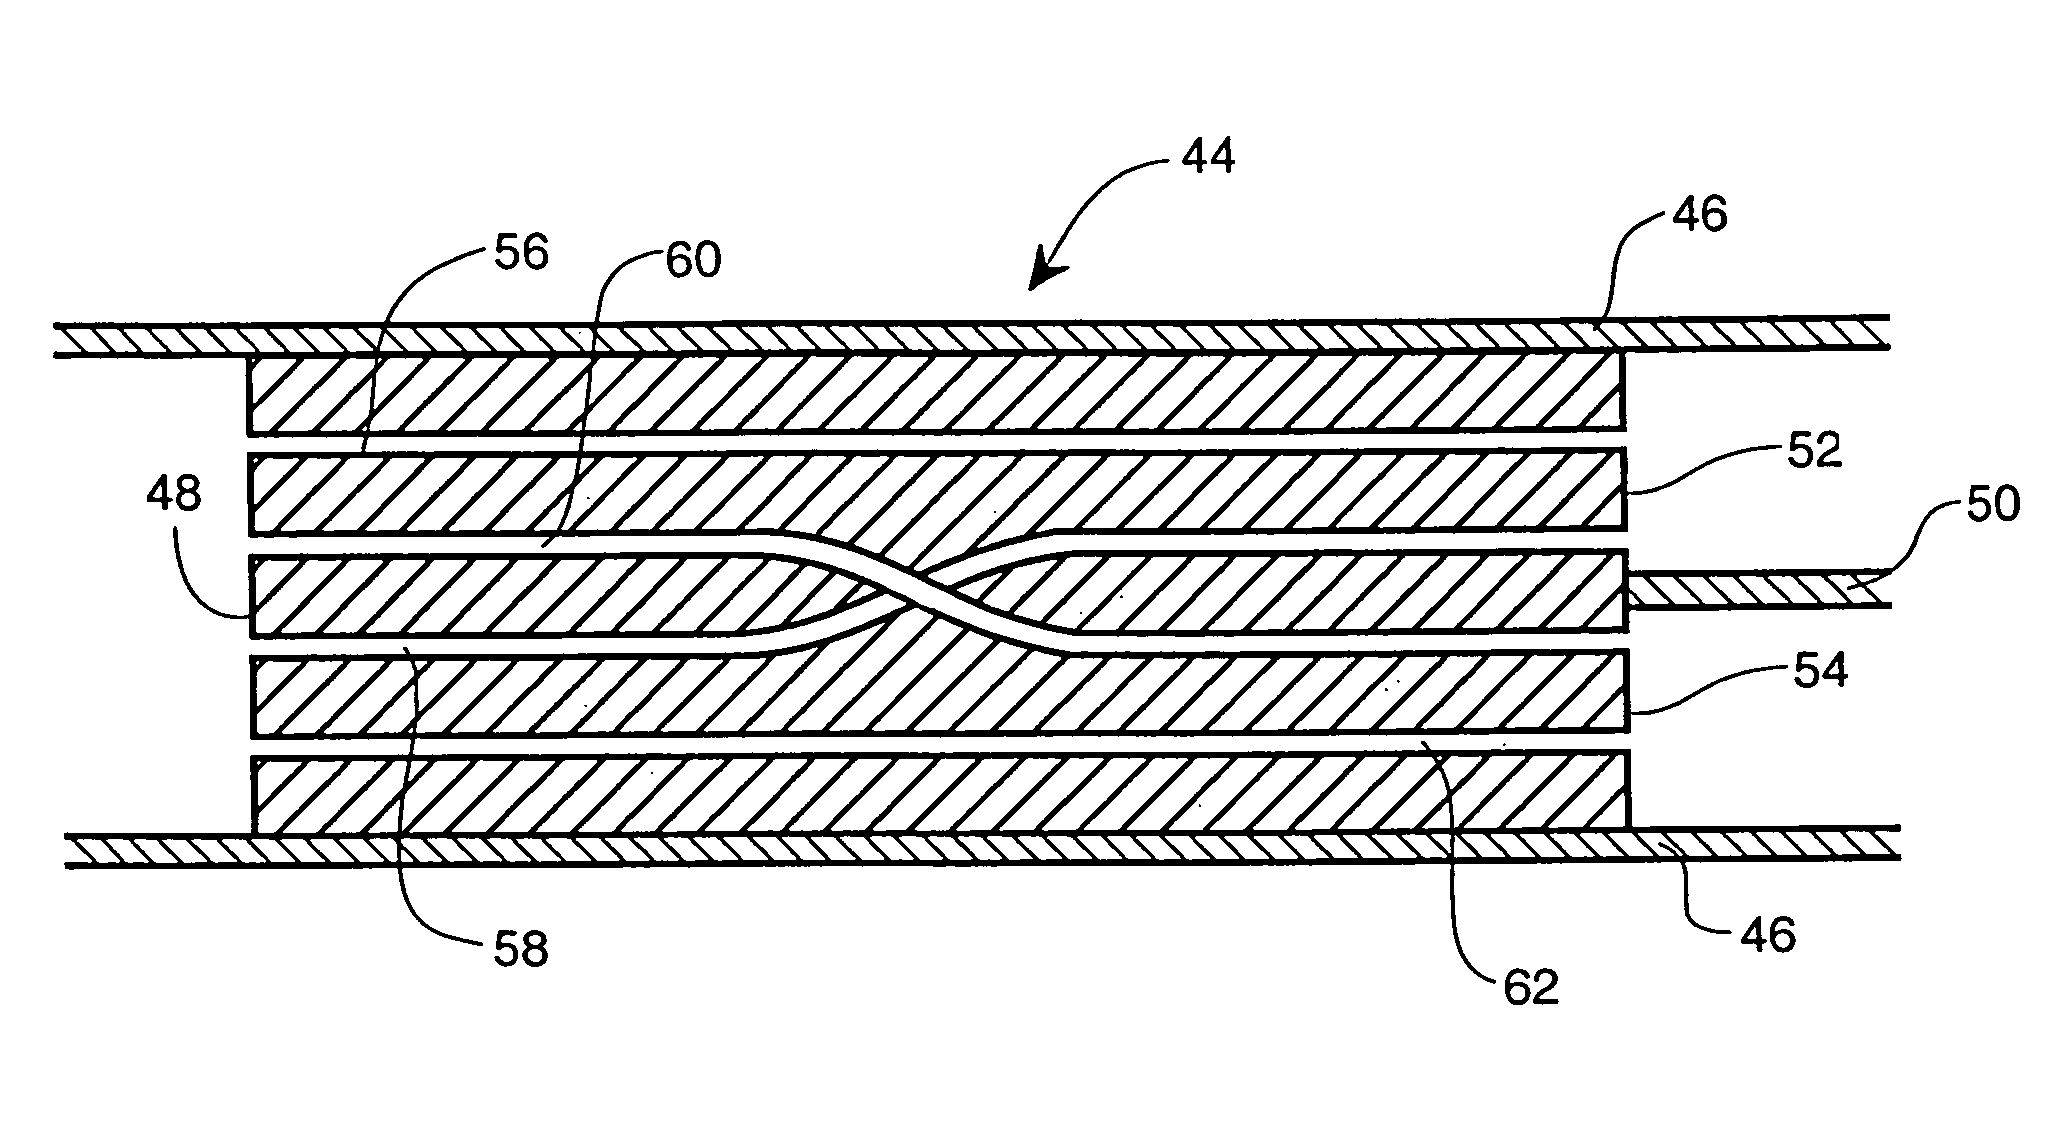 Method of manufacture of separation devices